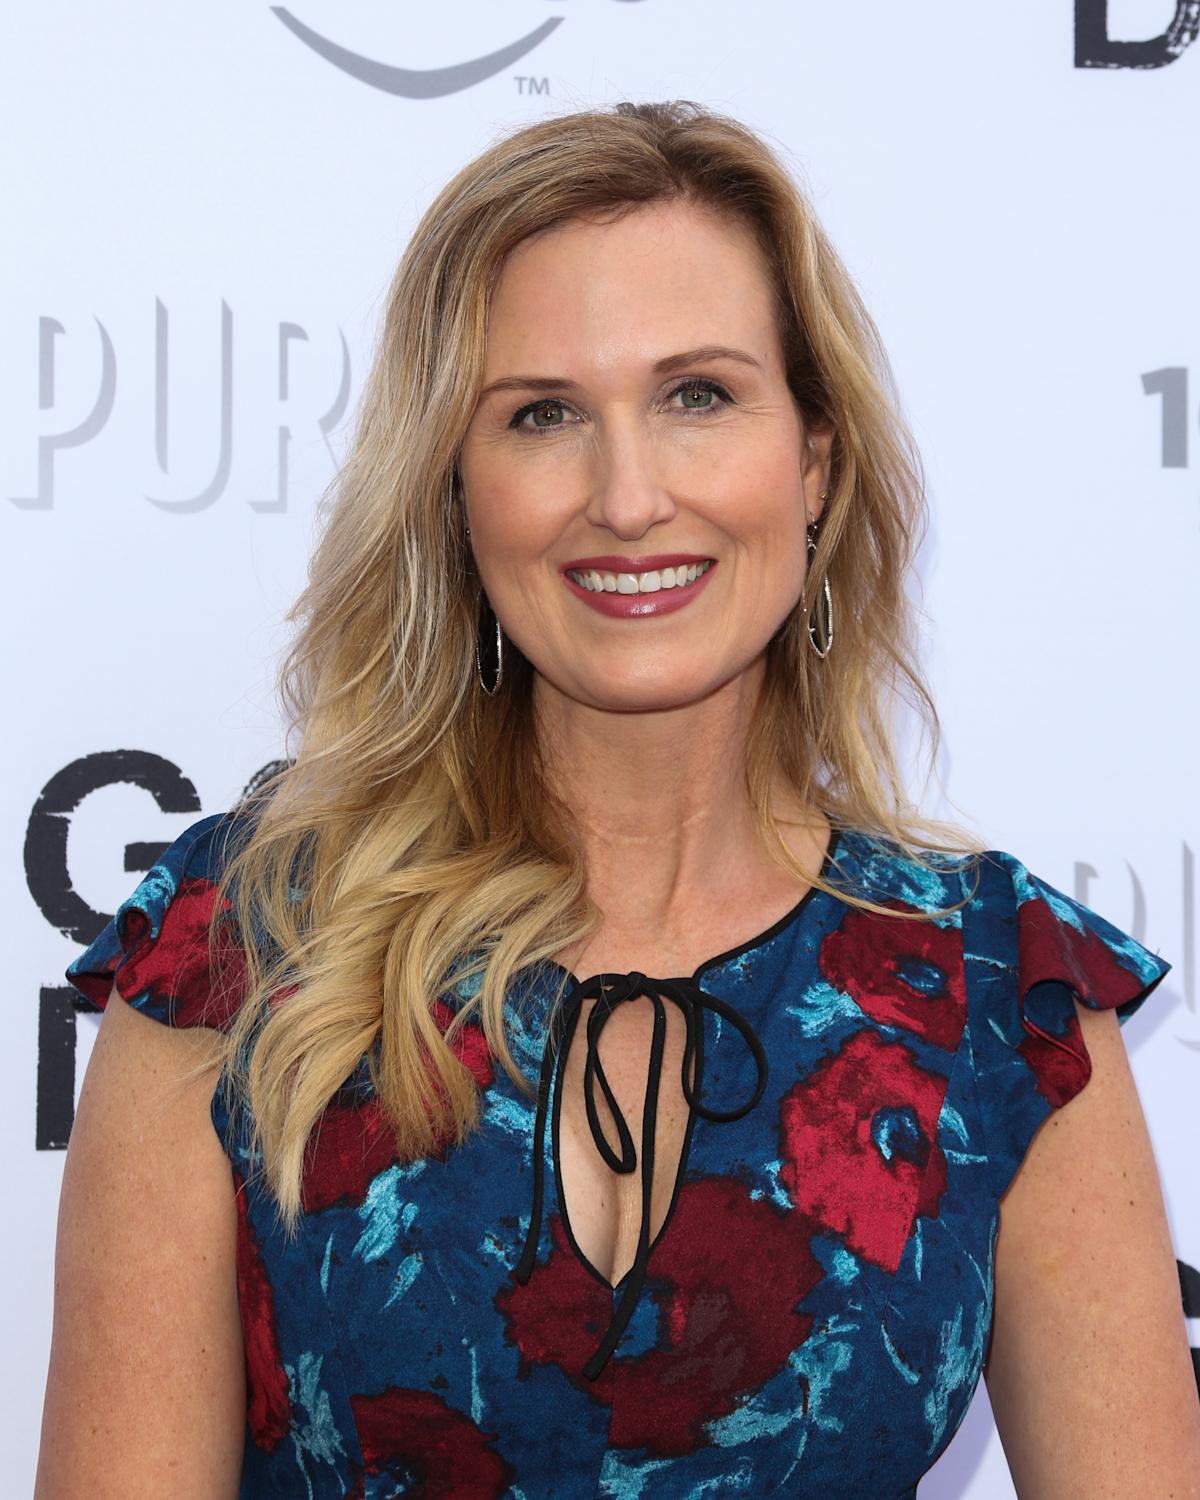 Duck Dynasty's Korie Robertson shares abortion views